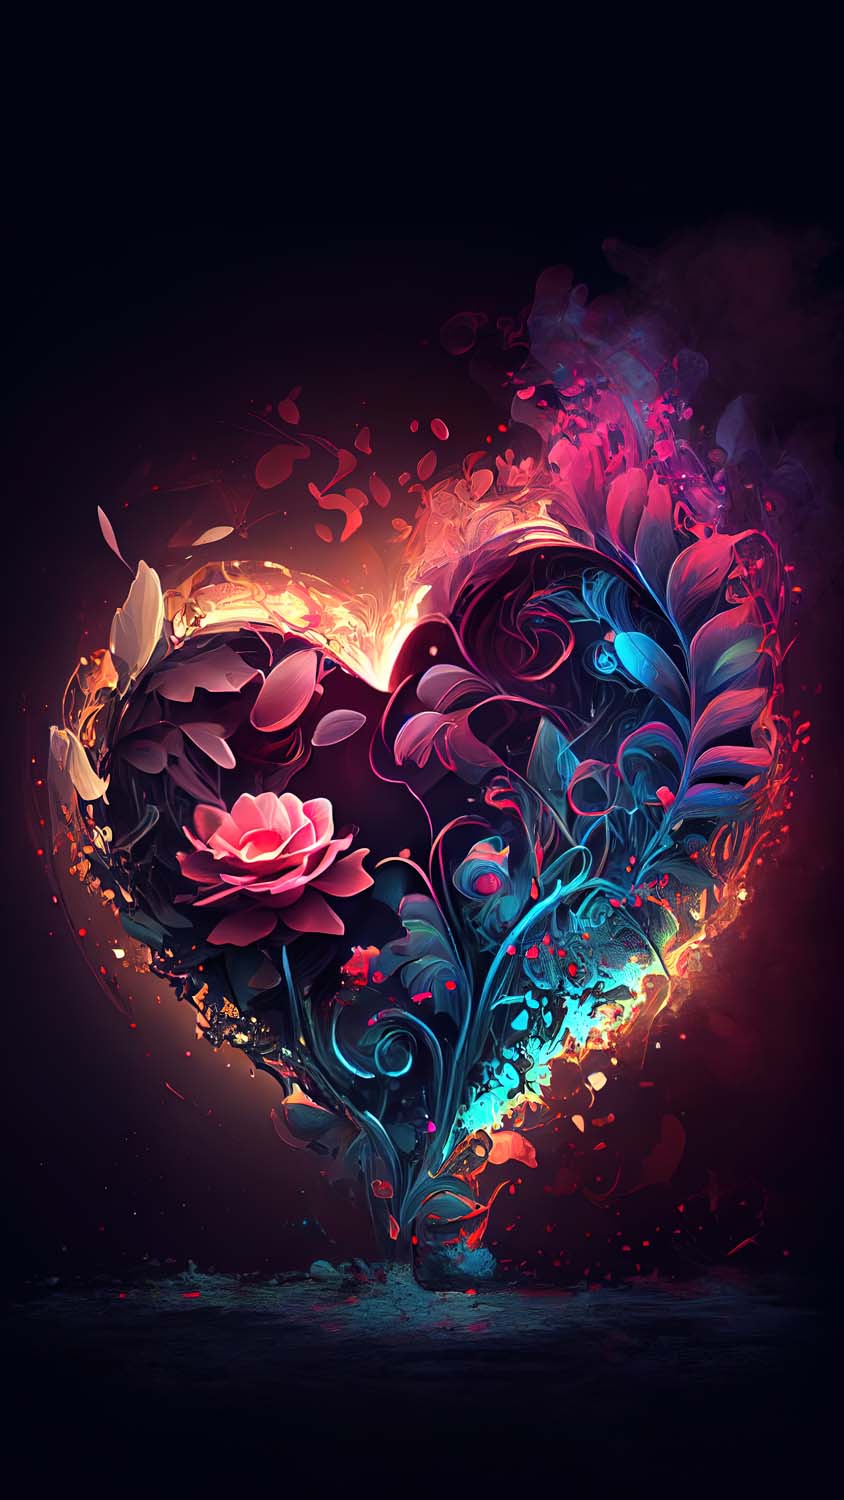 Floral Heart IPhone Wallpaper HD - IPhone Wallpapers : iPhone Wallpapers